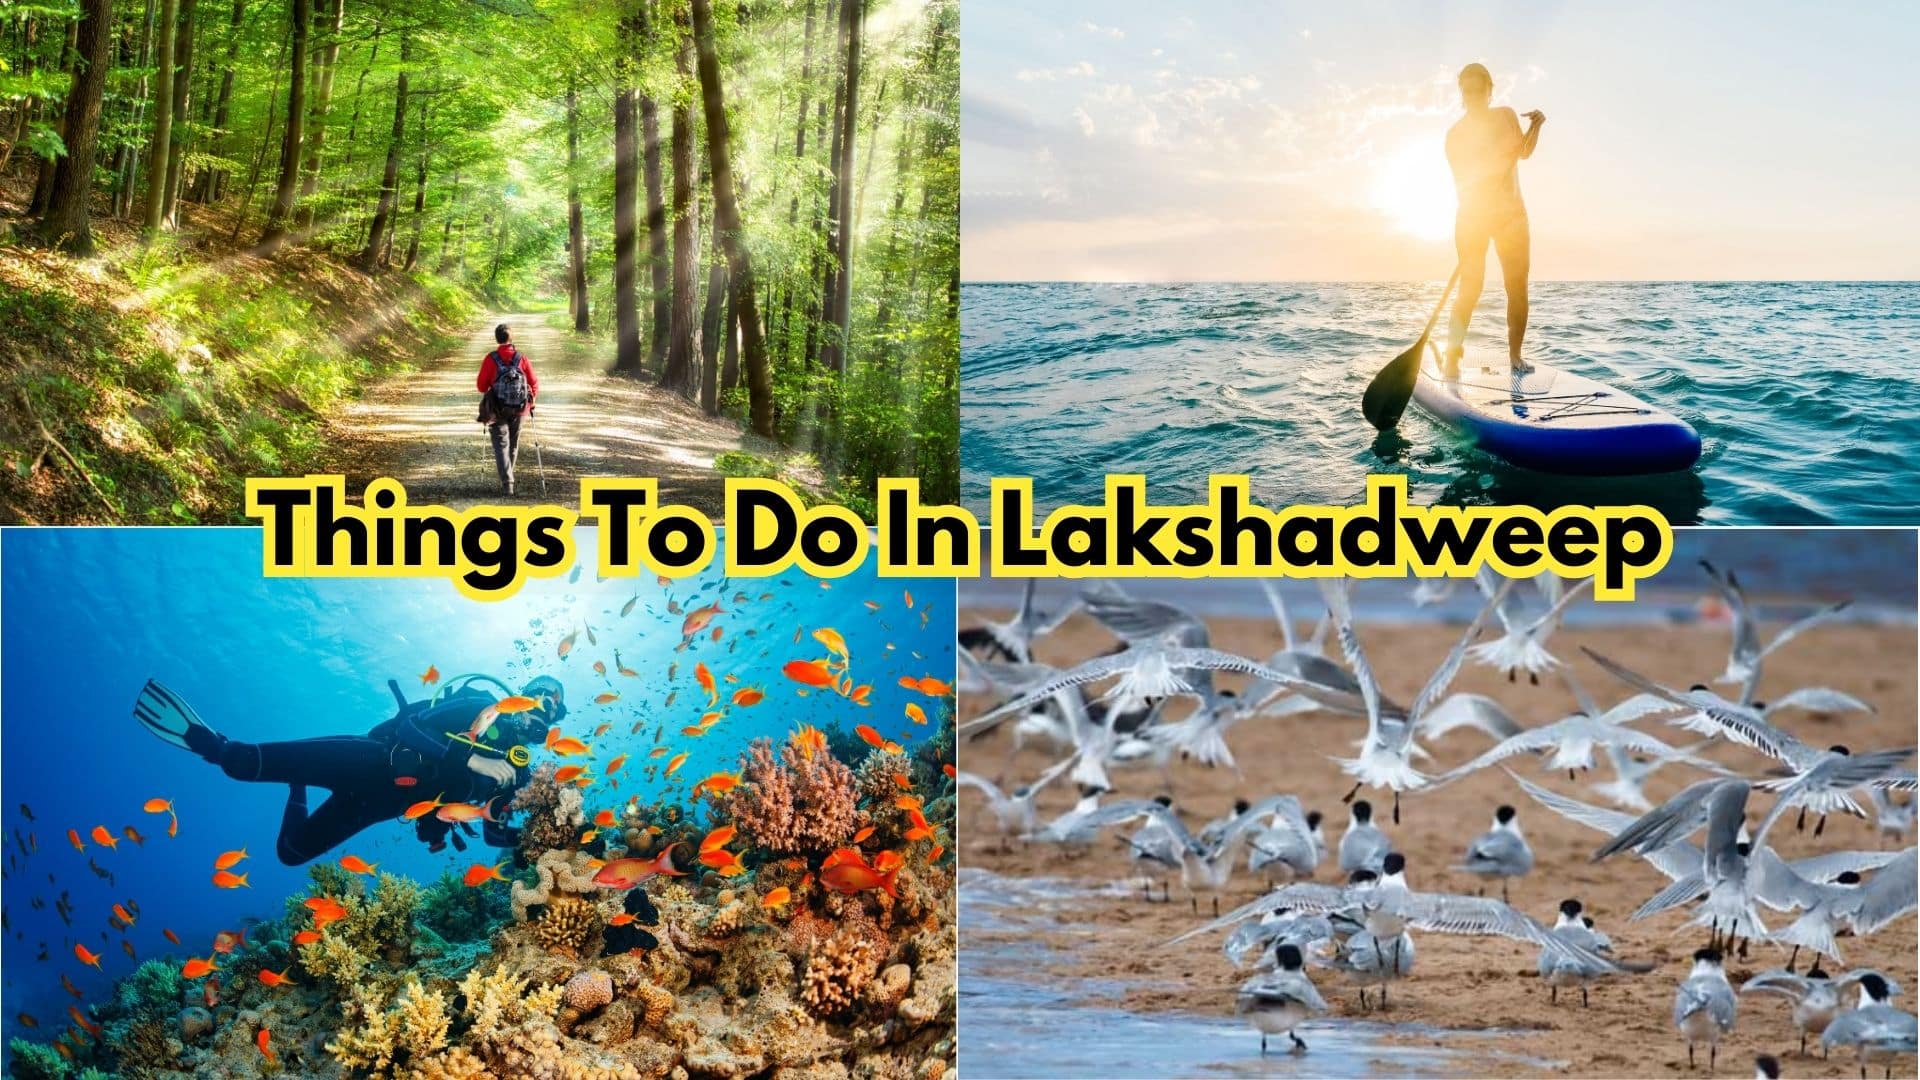 Things To Do In Lakshadweep